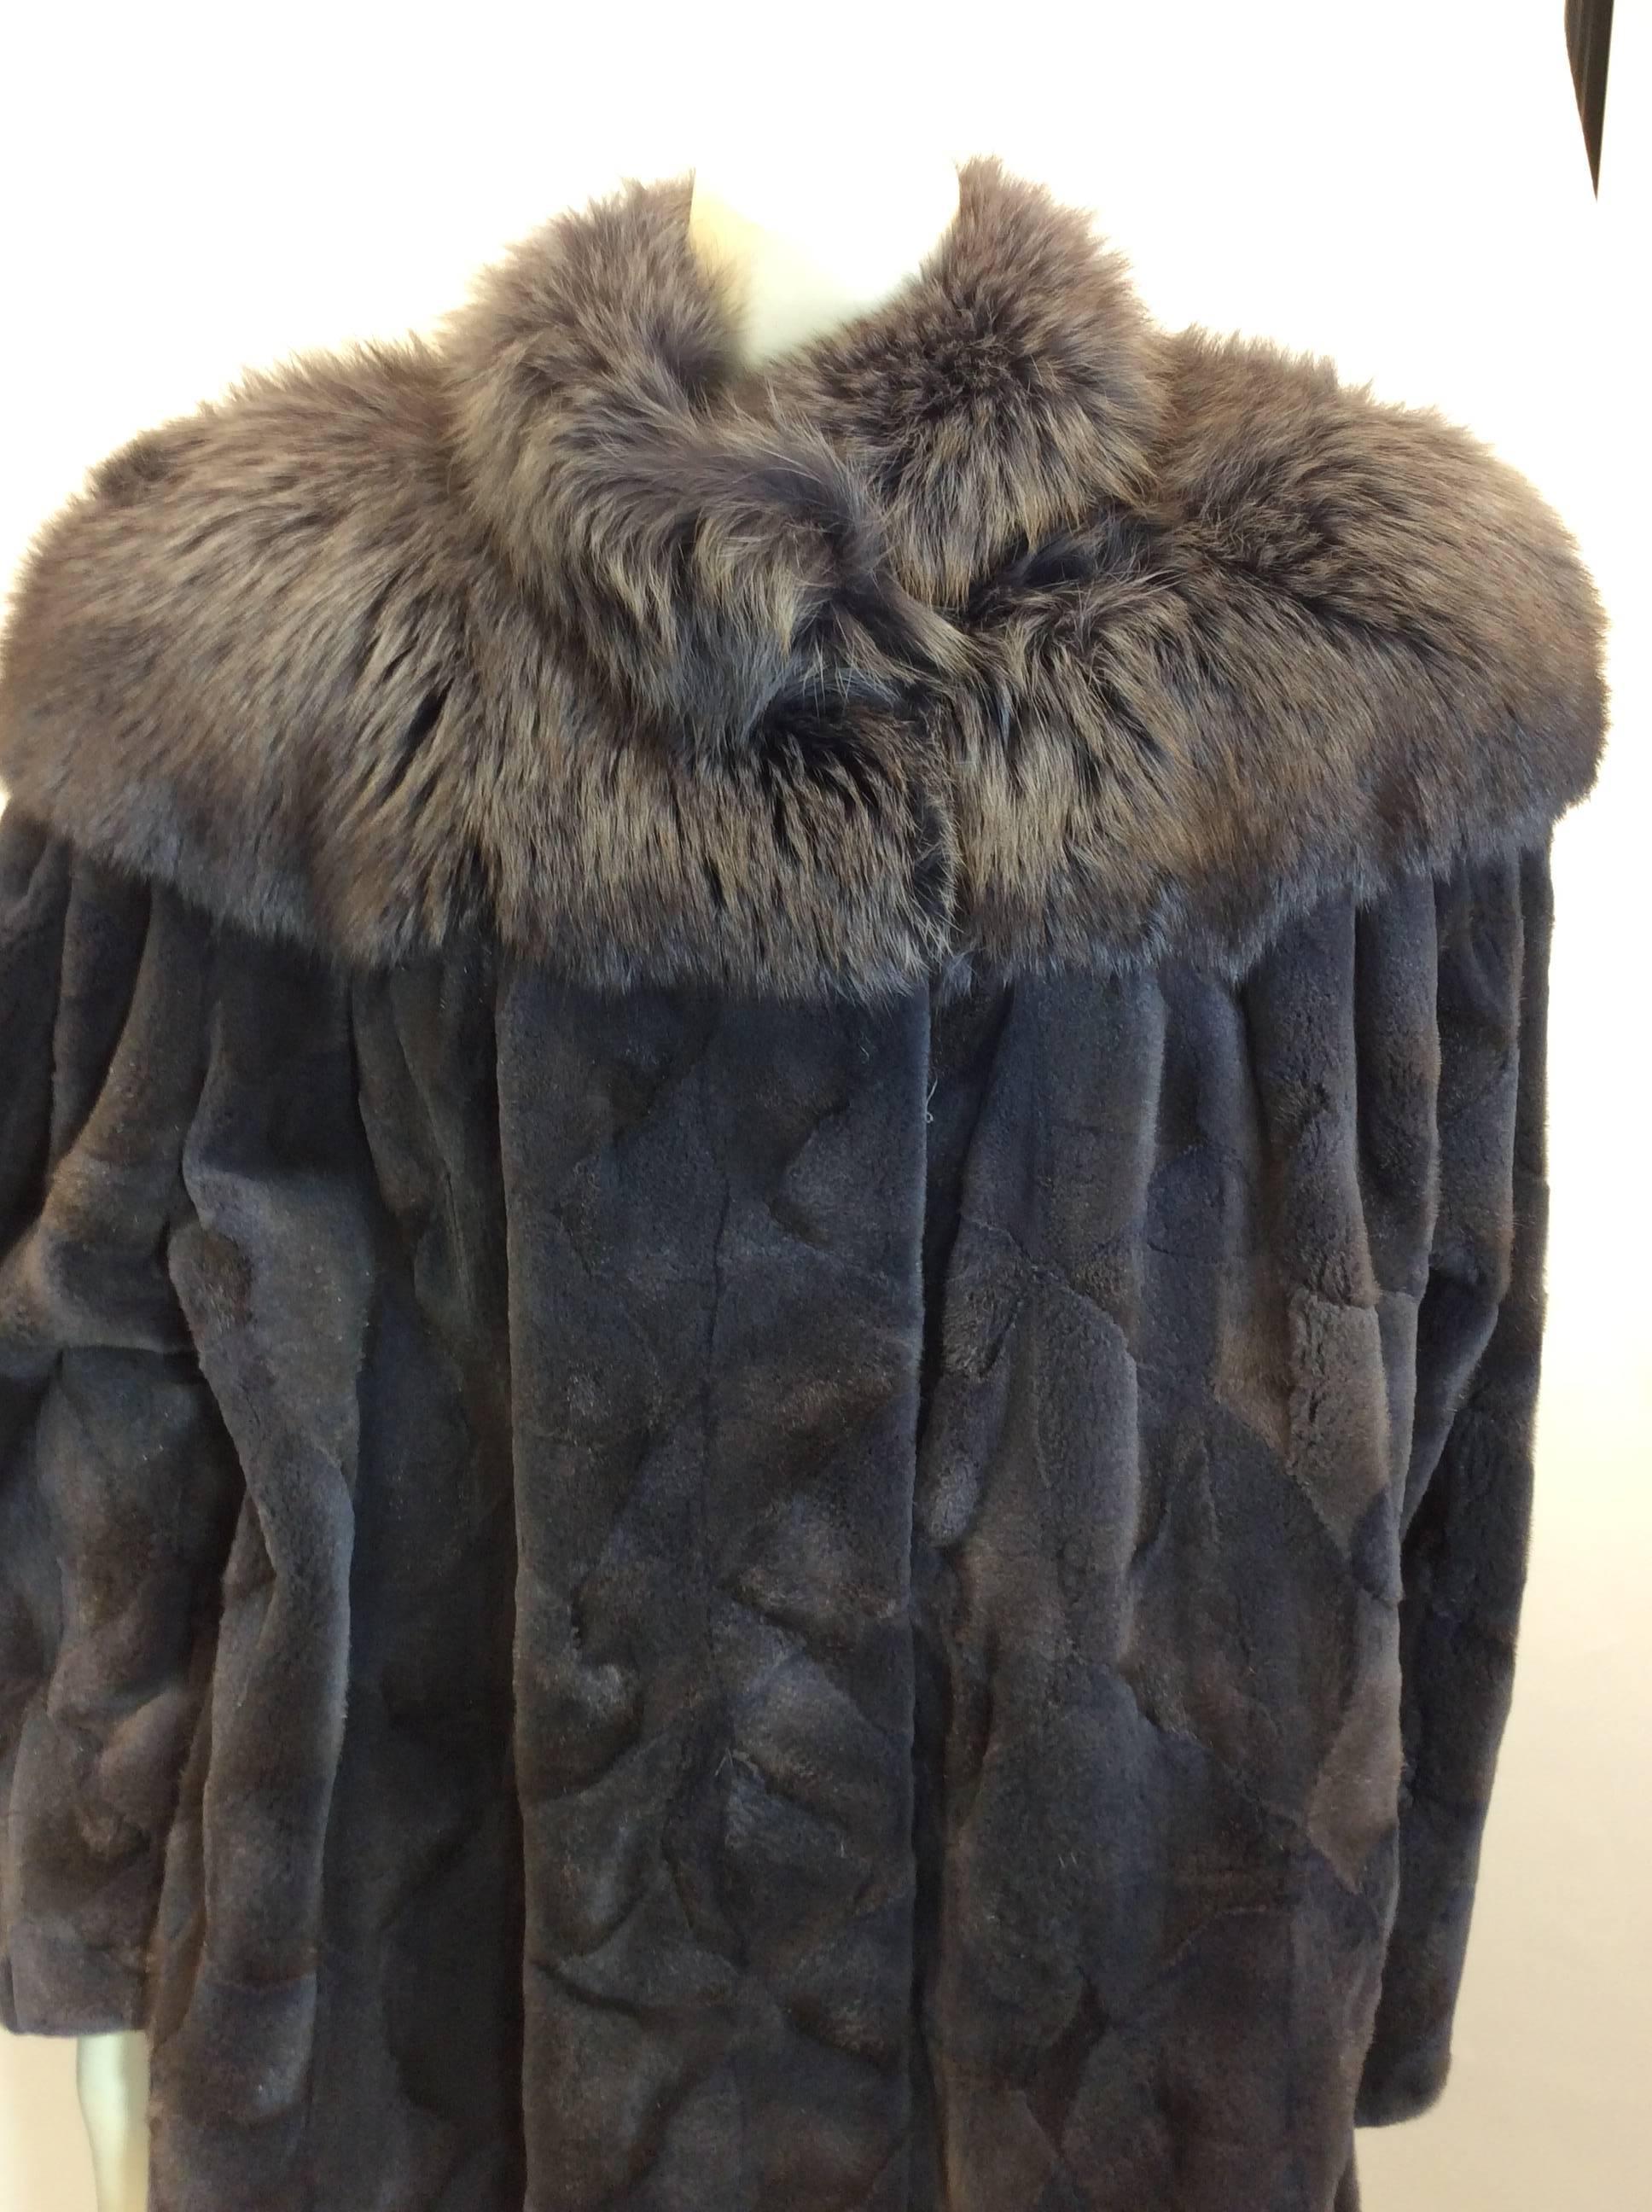 Siberian Gray Sheared Beaver Coat with Fox Trim
$899
Large collar fox detail
Fully lined interior